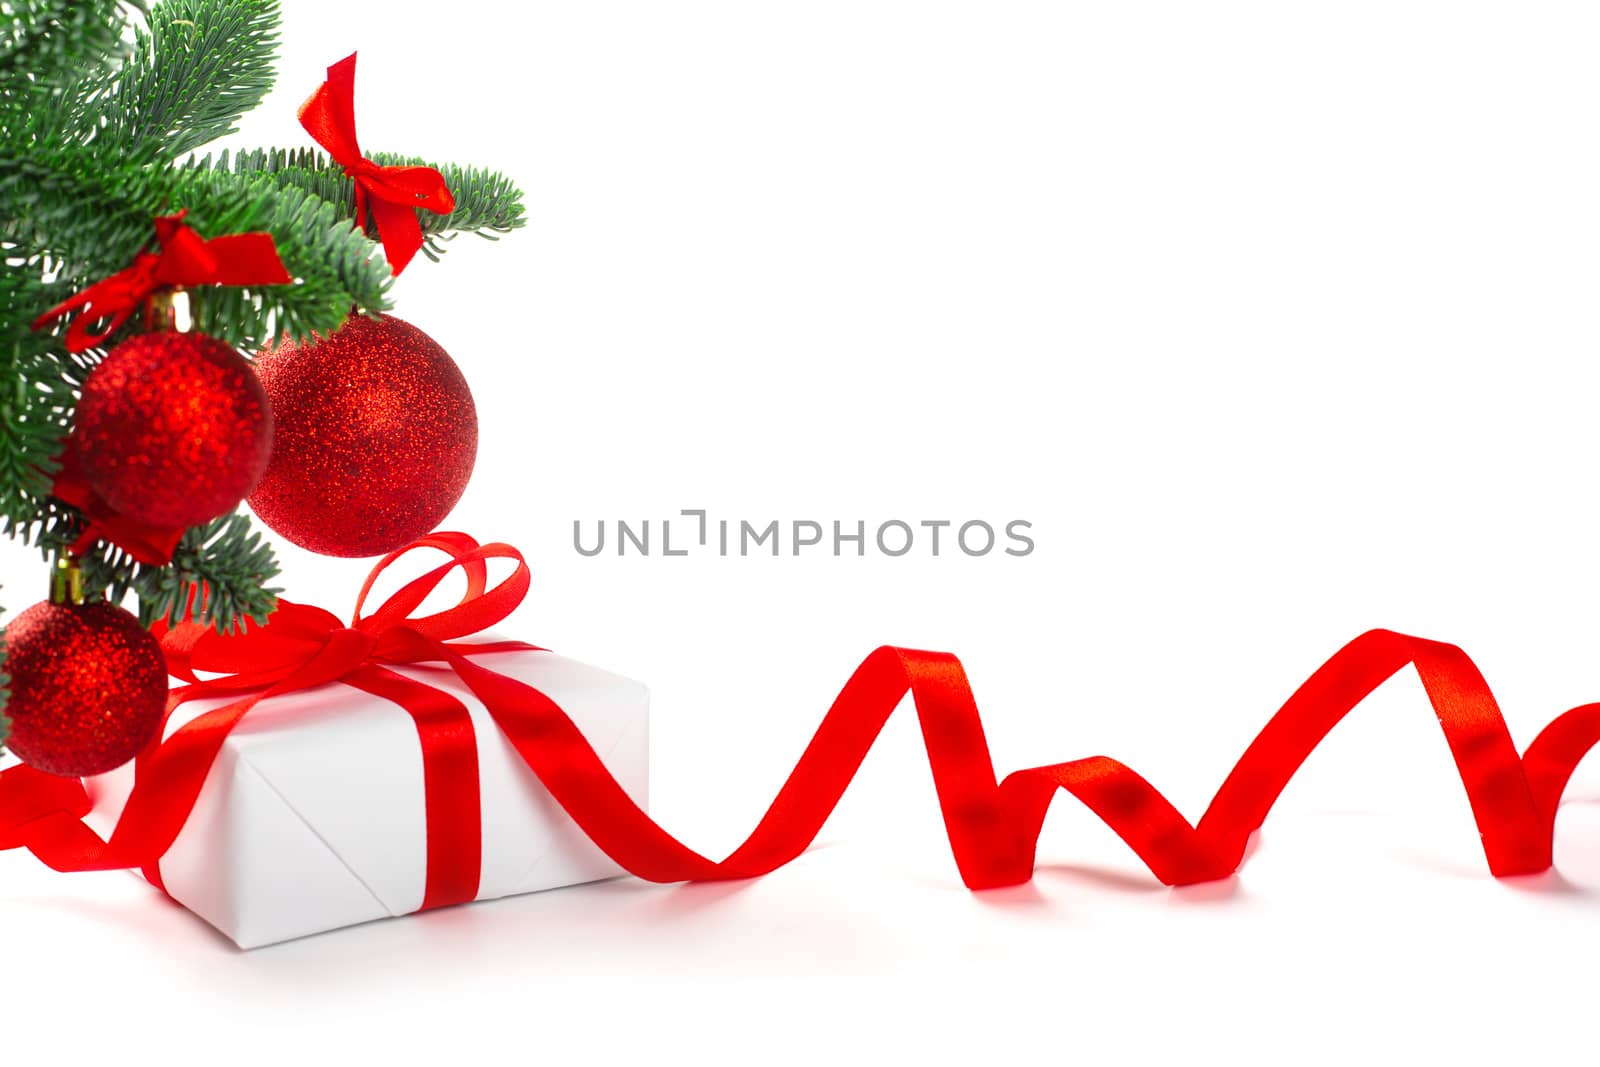 White holiday present gift box with red satin bow and curly ribbon under Christmas tree with baubles, border frame design isolated on white background